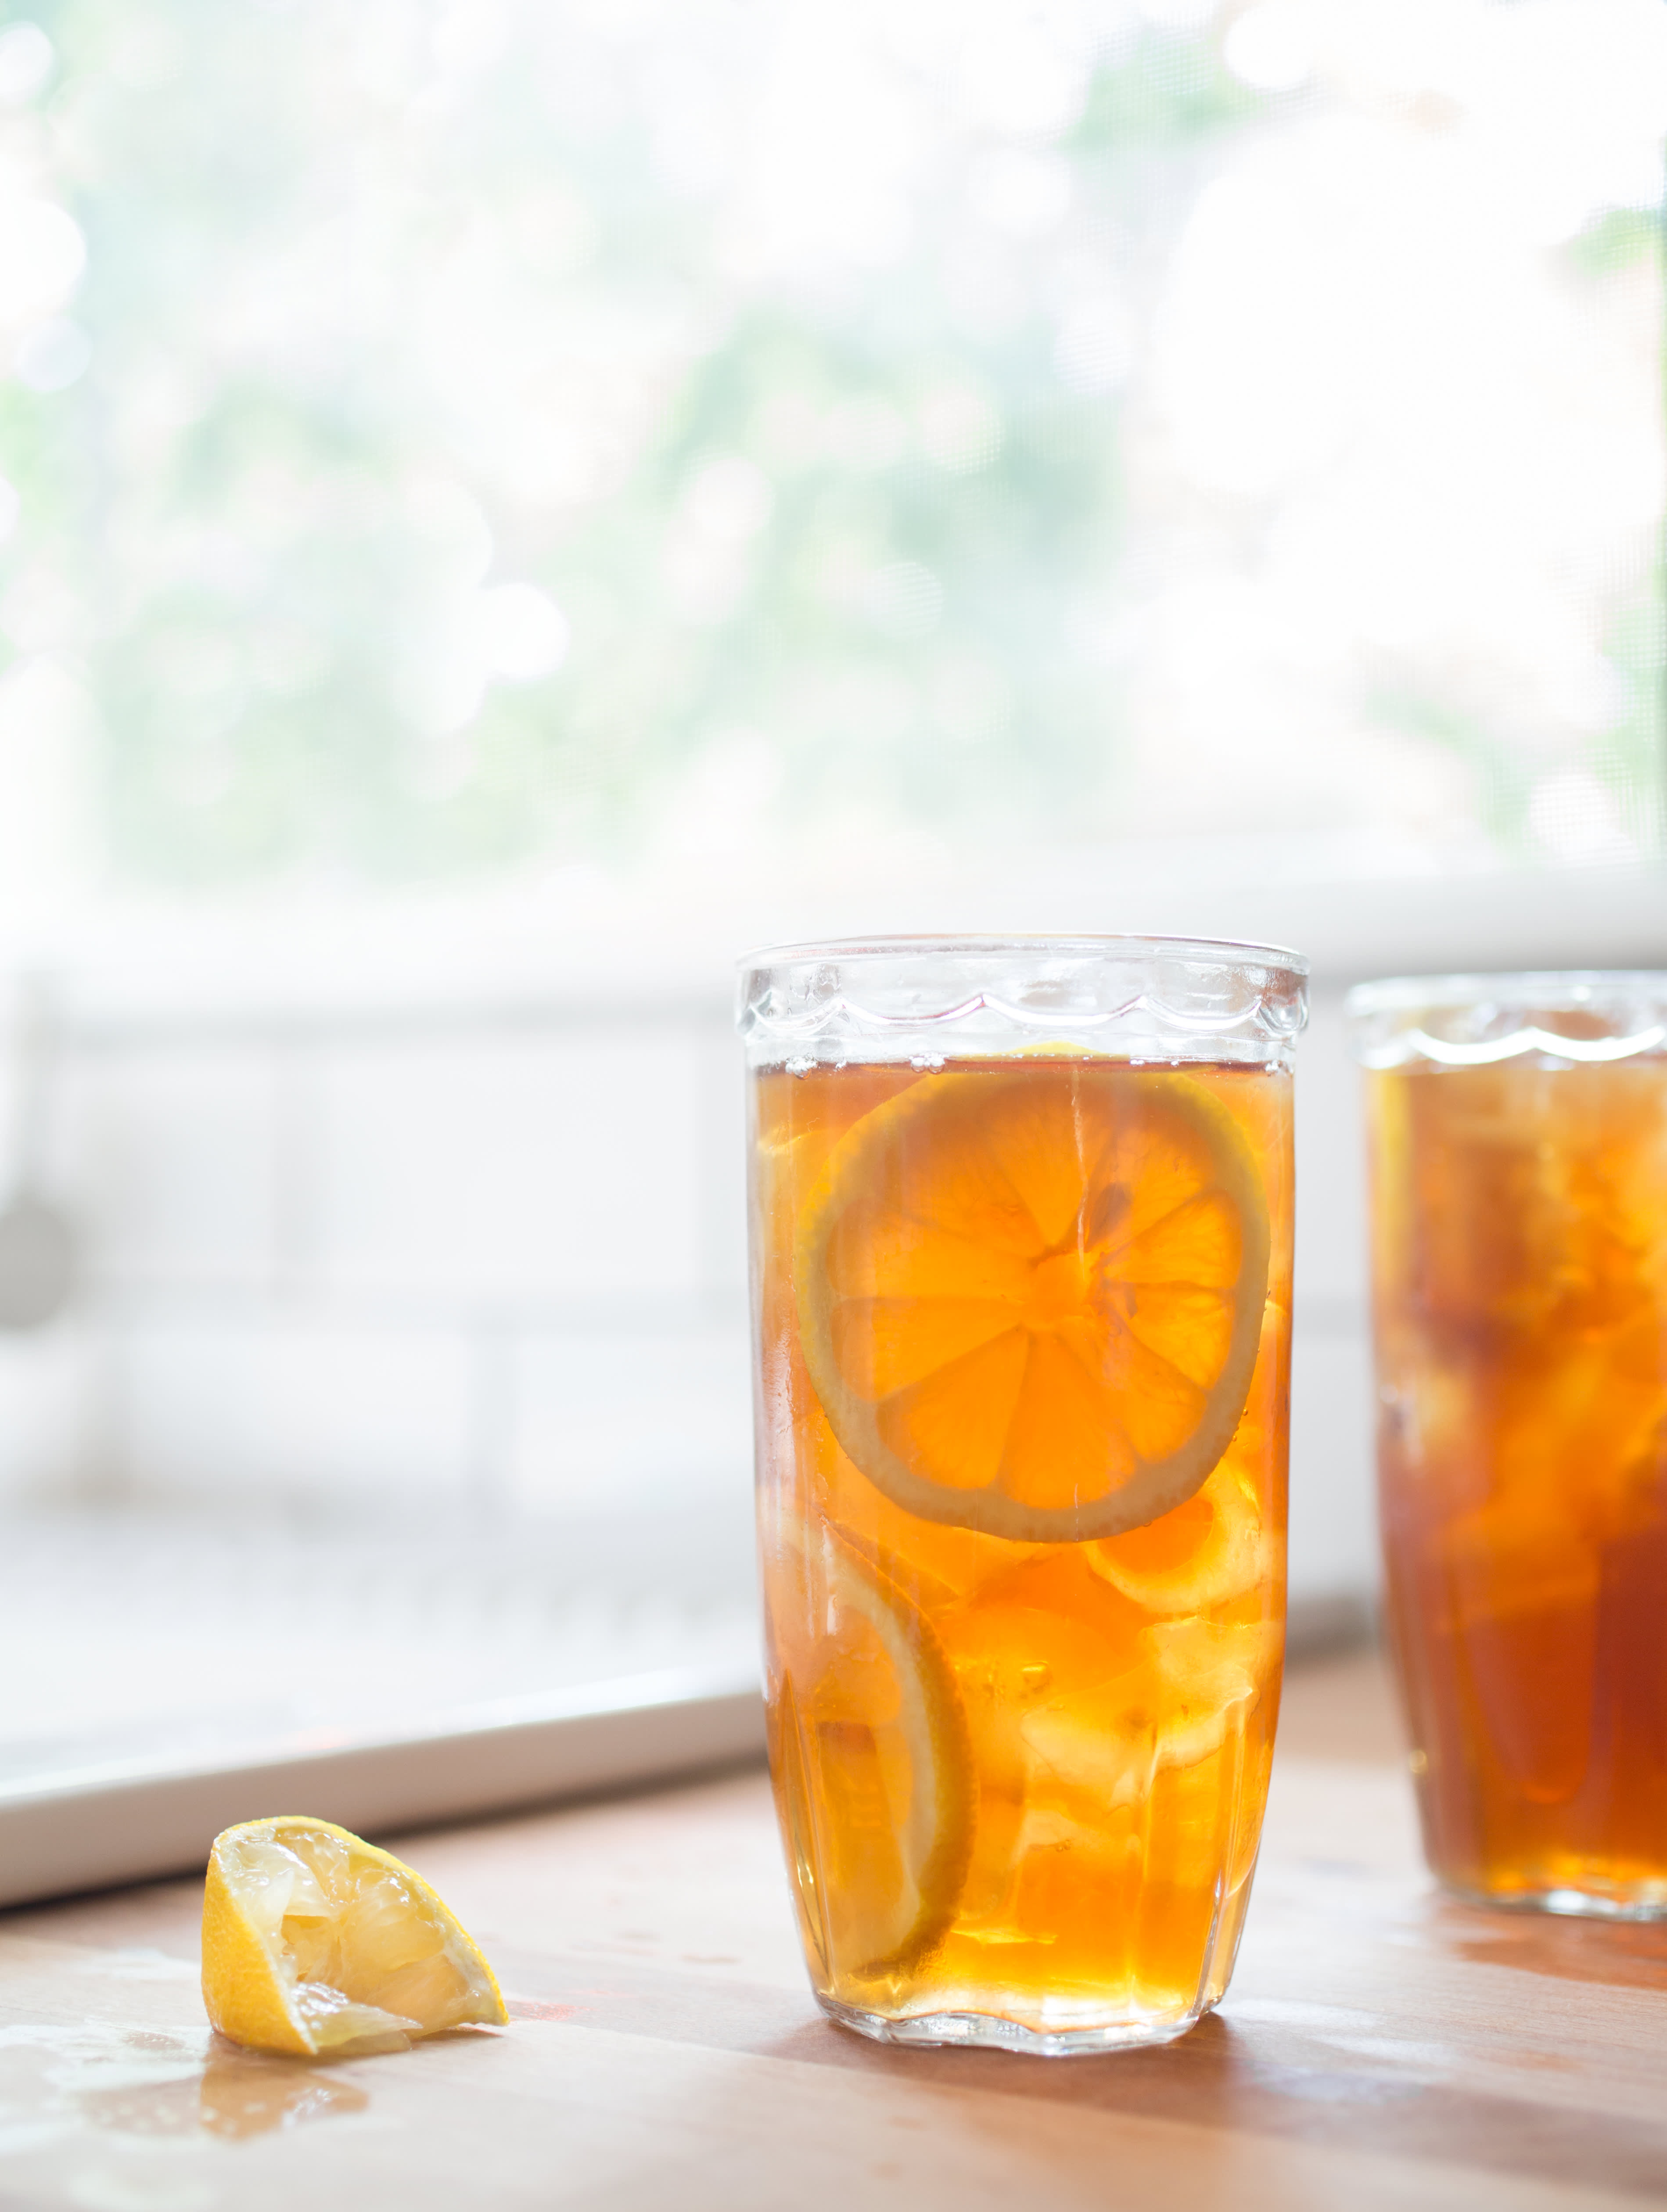 Sun Tea Recipe (and About Making It Safely)